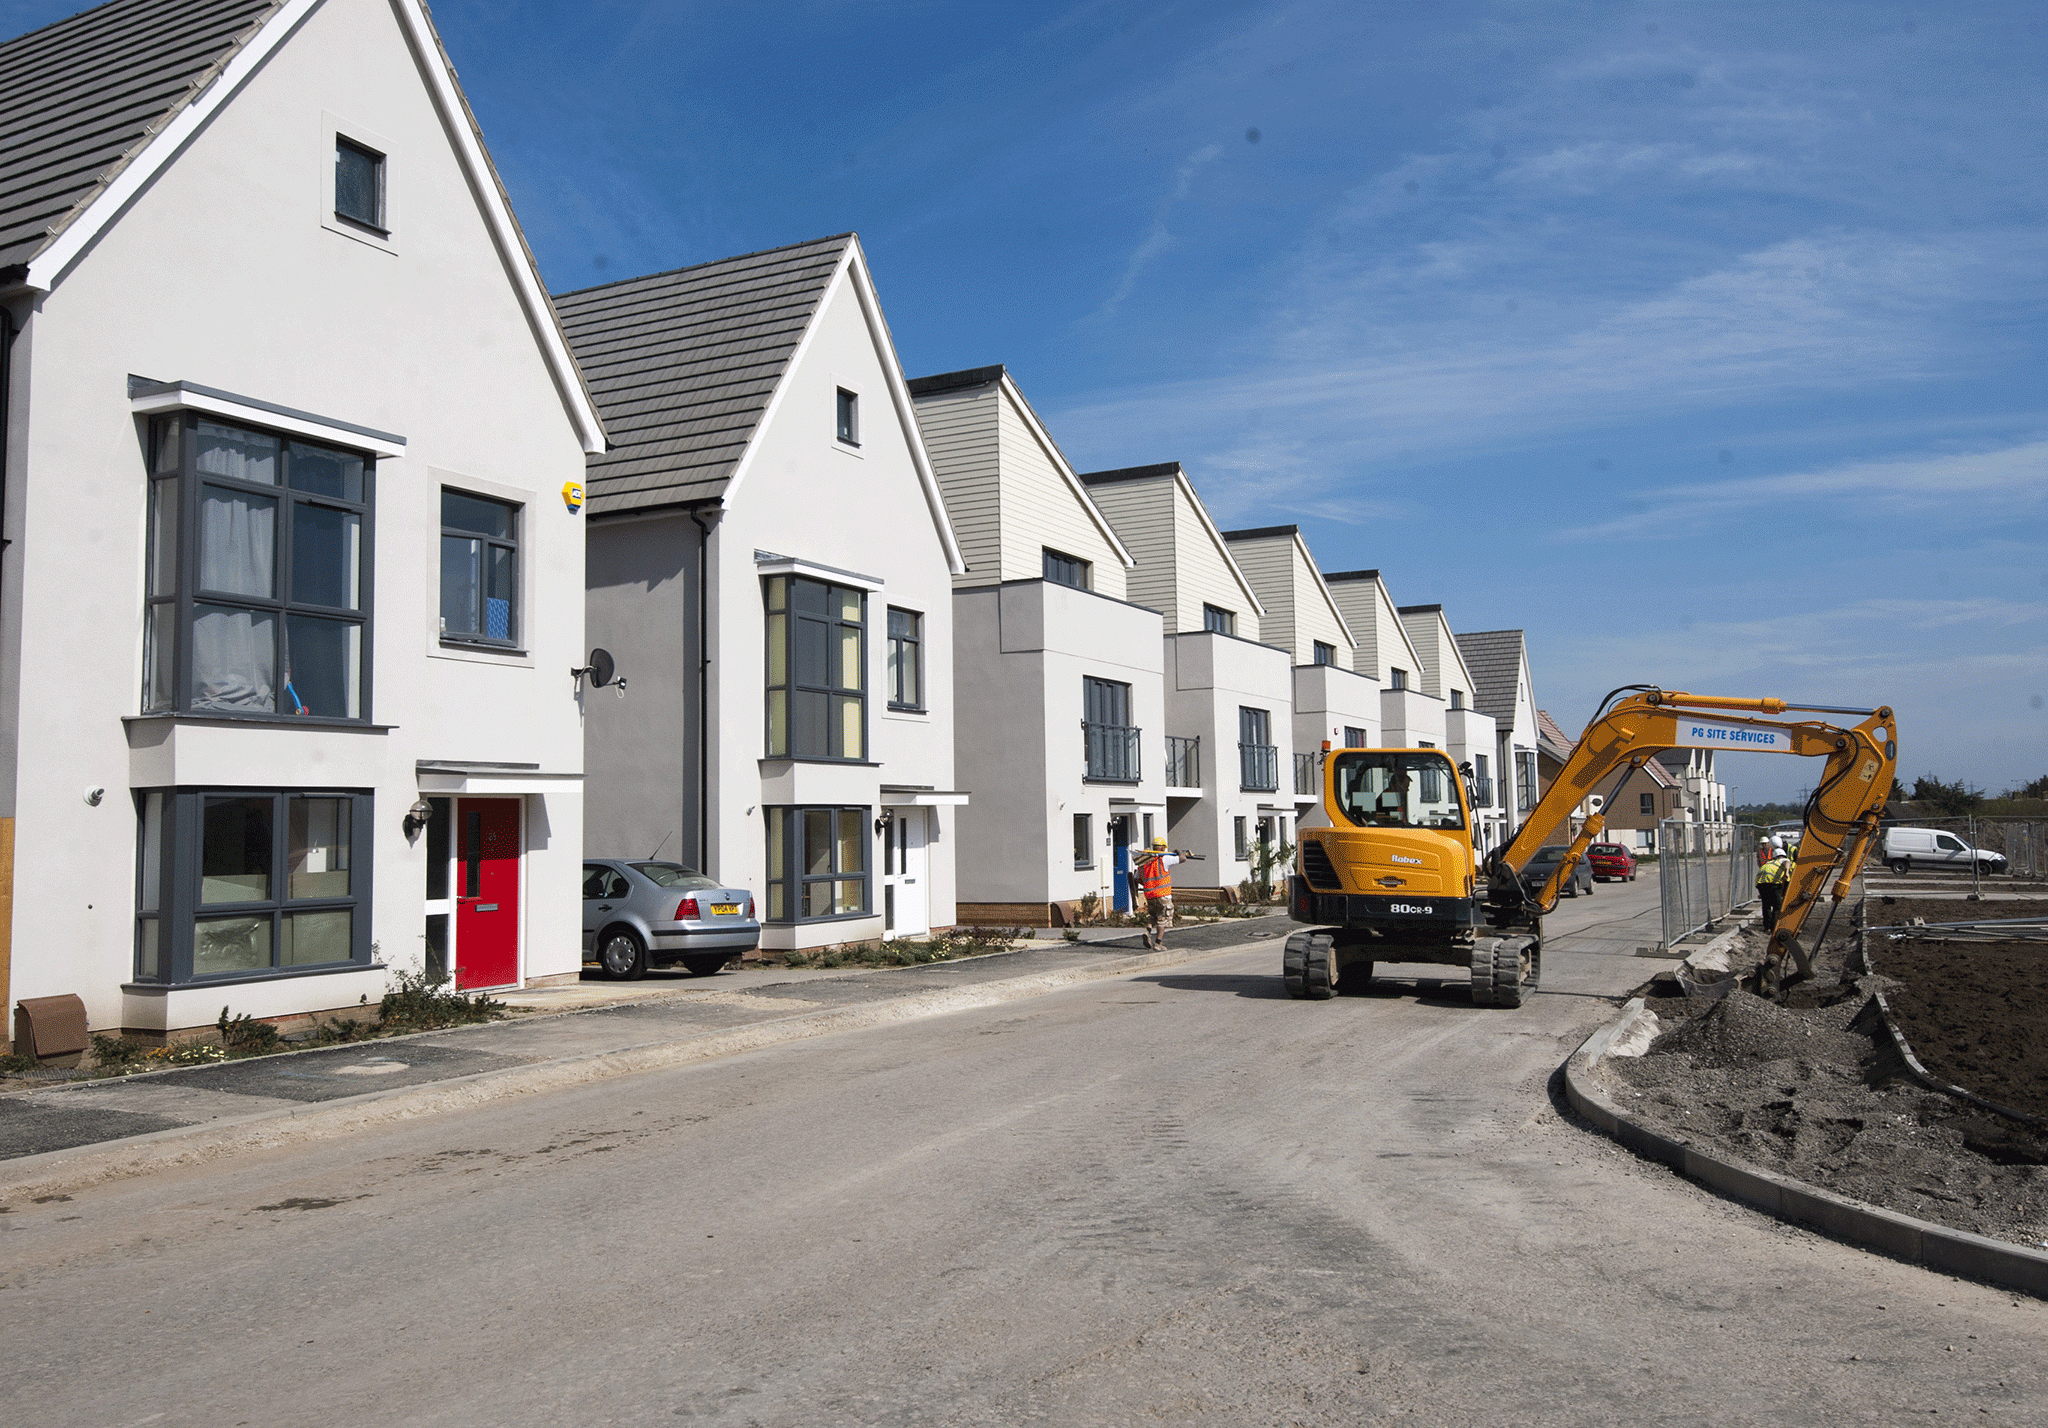 Help to Buy, Persimmon Homes profits and why our columnist is outraged